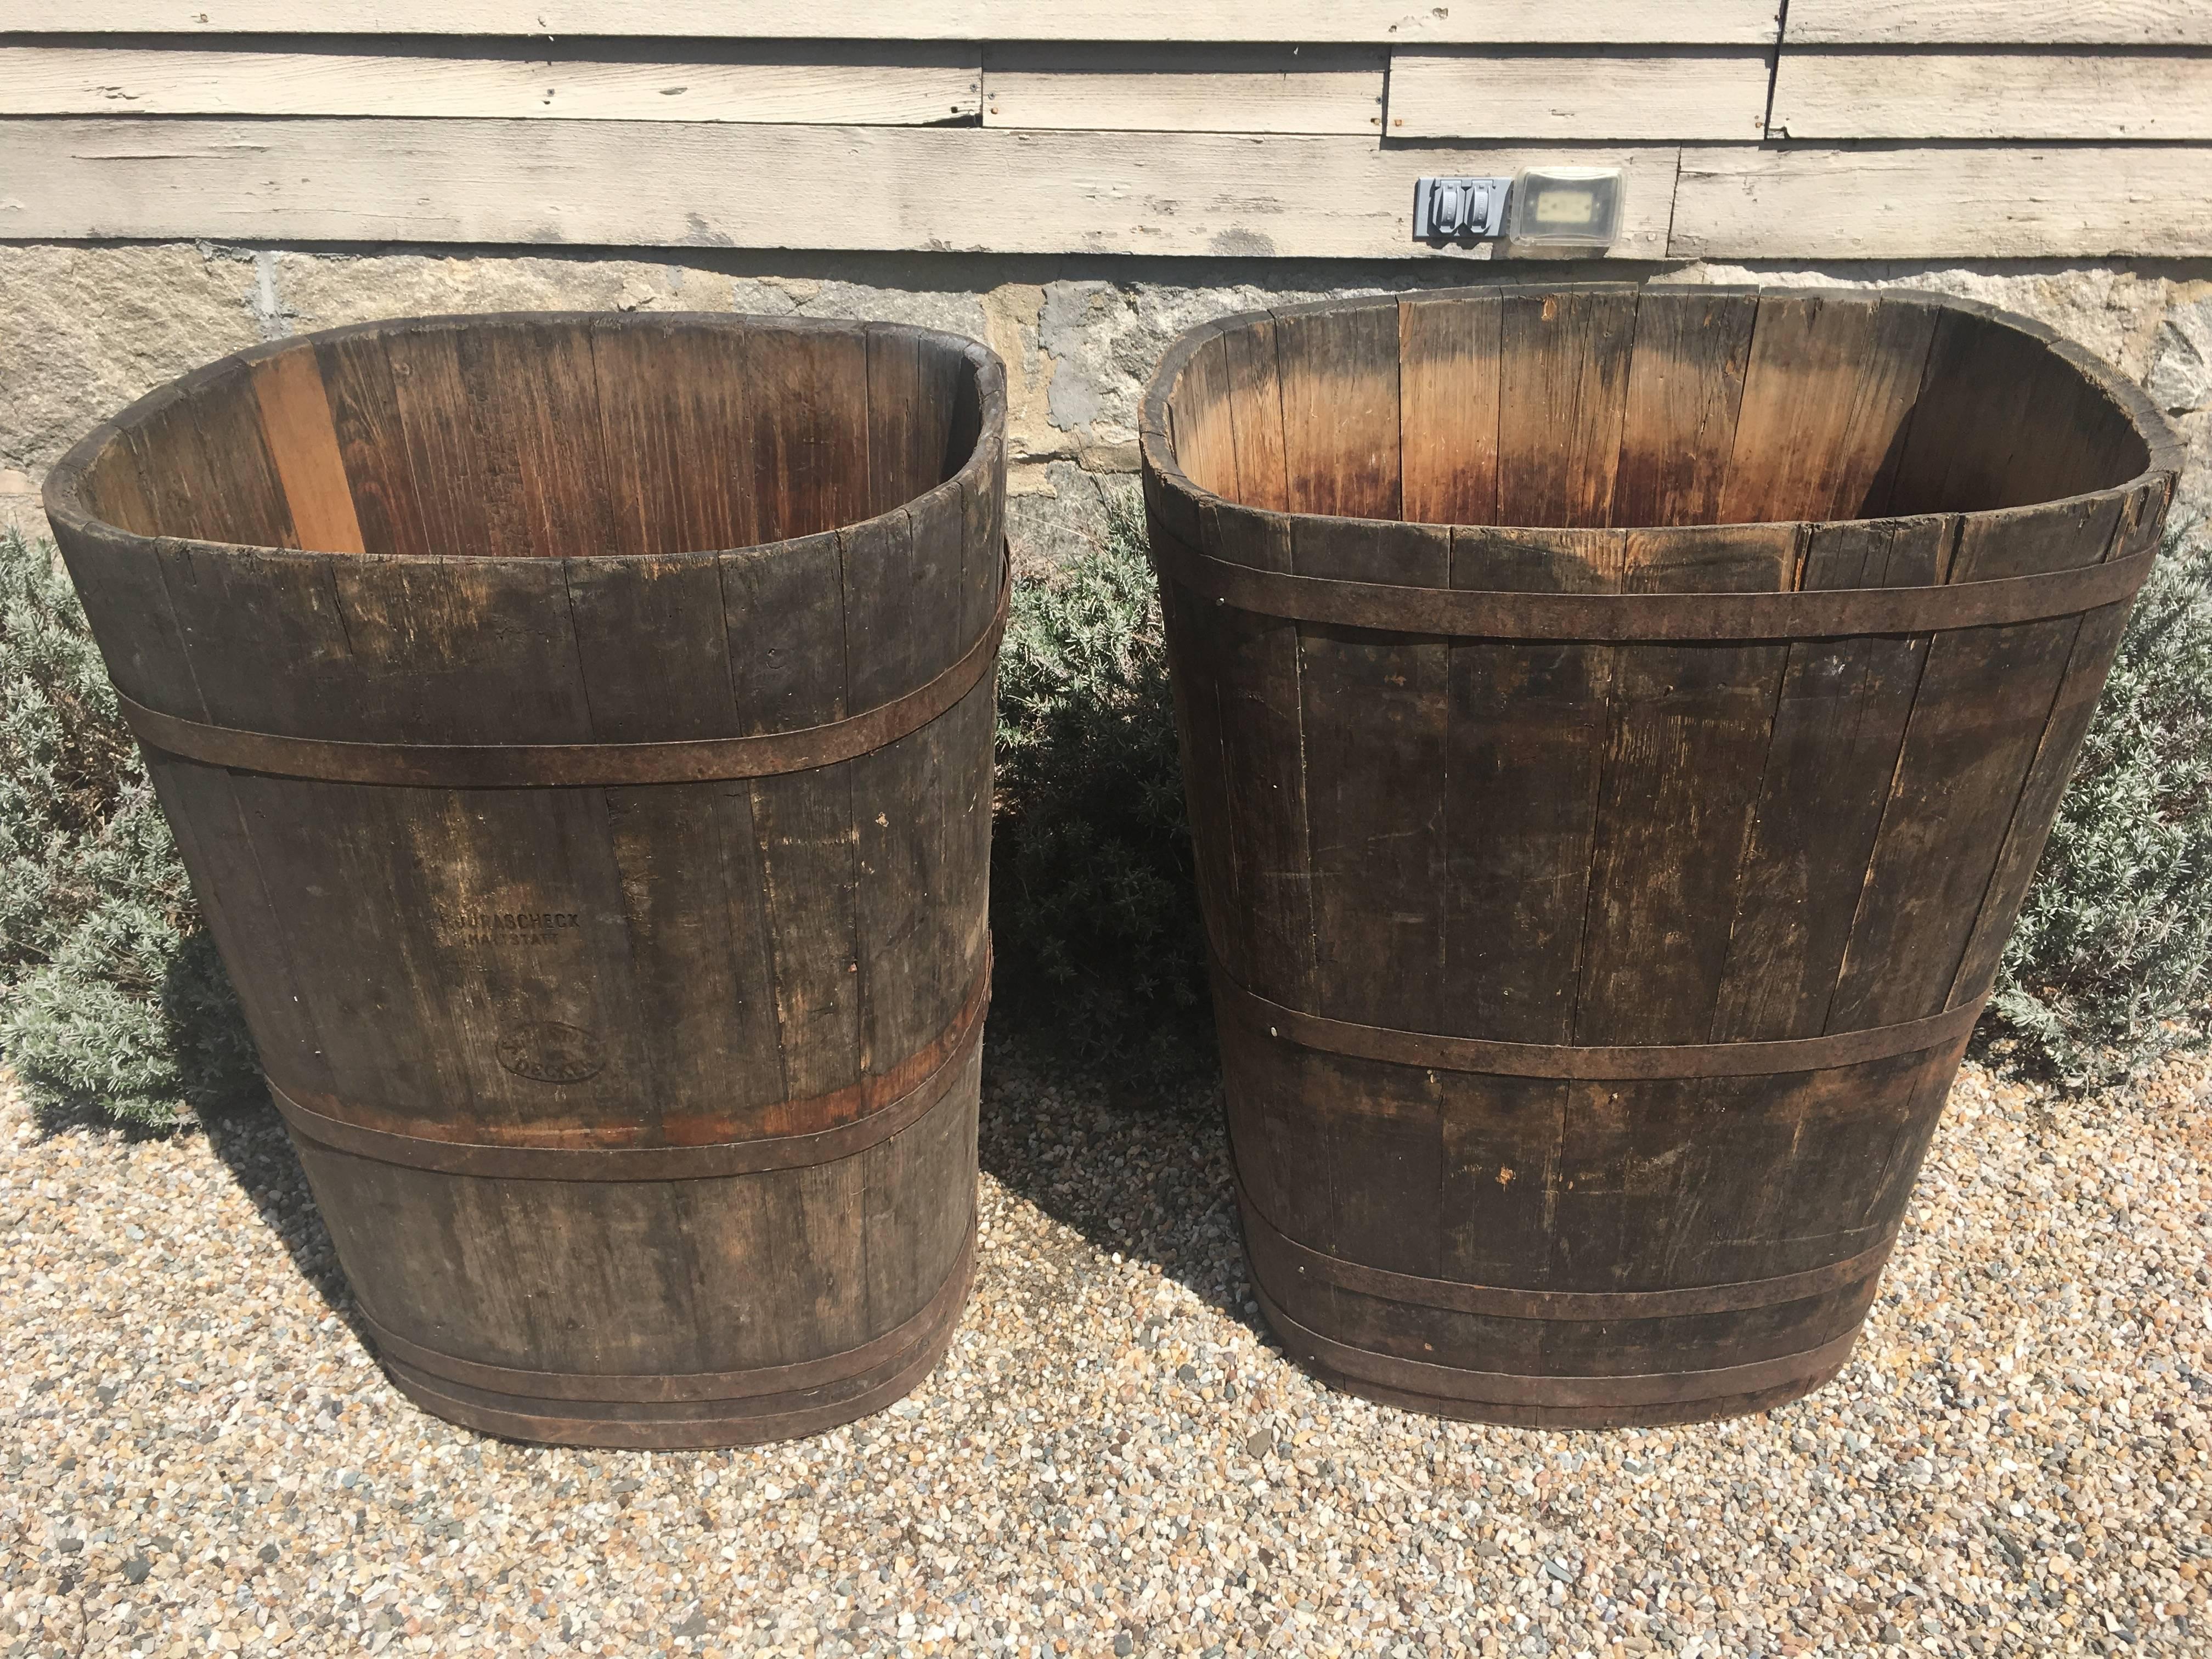 On one of our most recent buying trips, we were fortunate enough to source four pairs of very large wooden tubs that were used as Master Collection Vessels for the grape harvest in Alsace. At least one in each pair is stamped by its maker, 